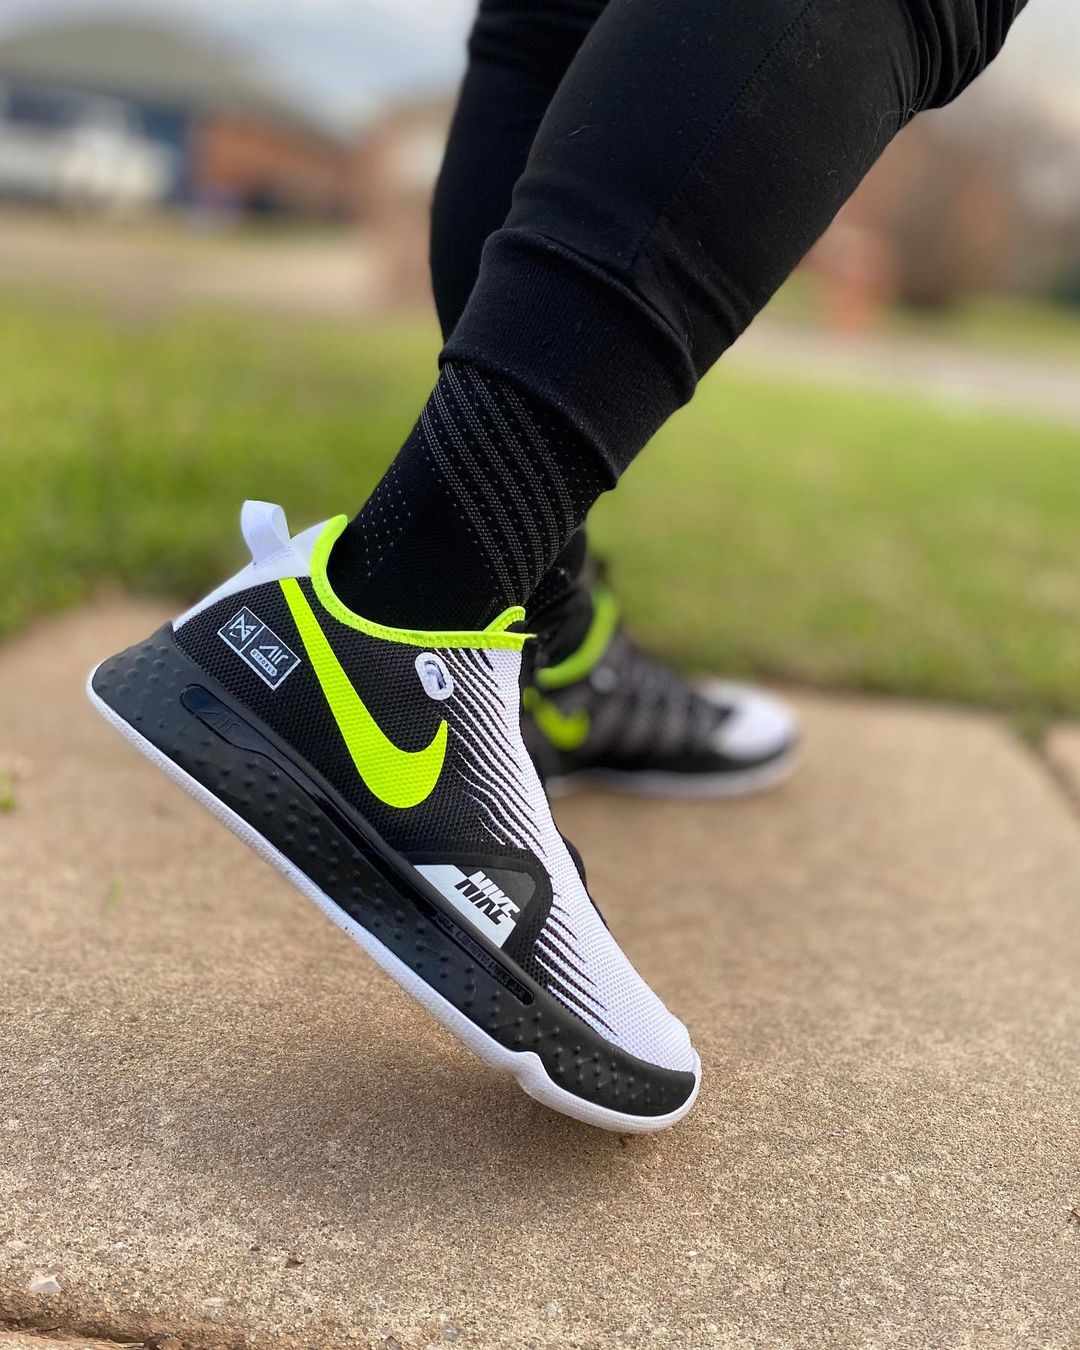 Nike By You iD PG 4 Black White Volt